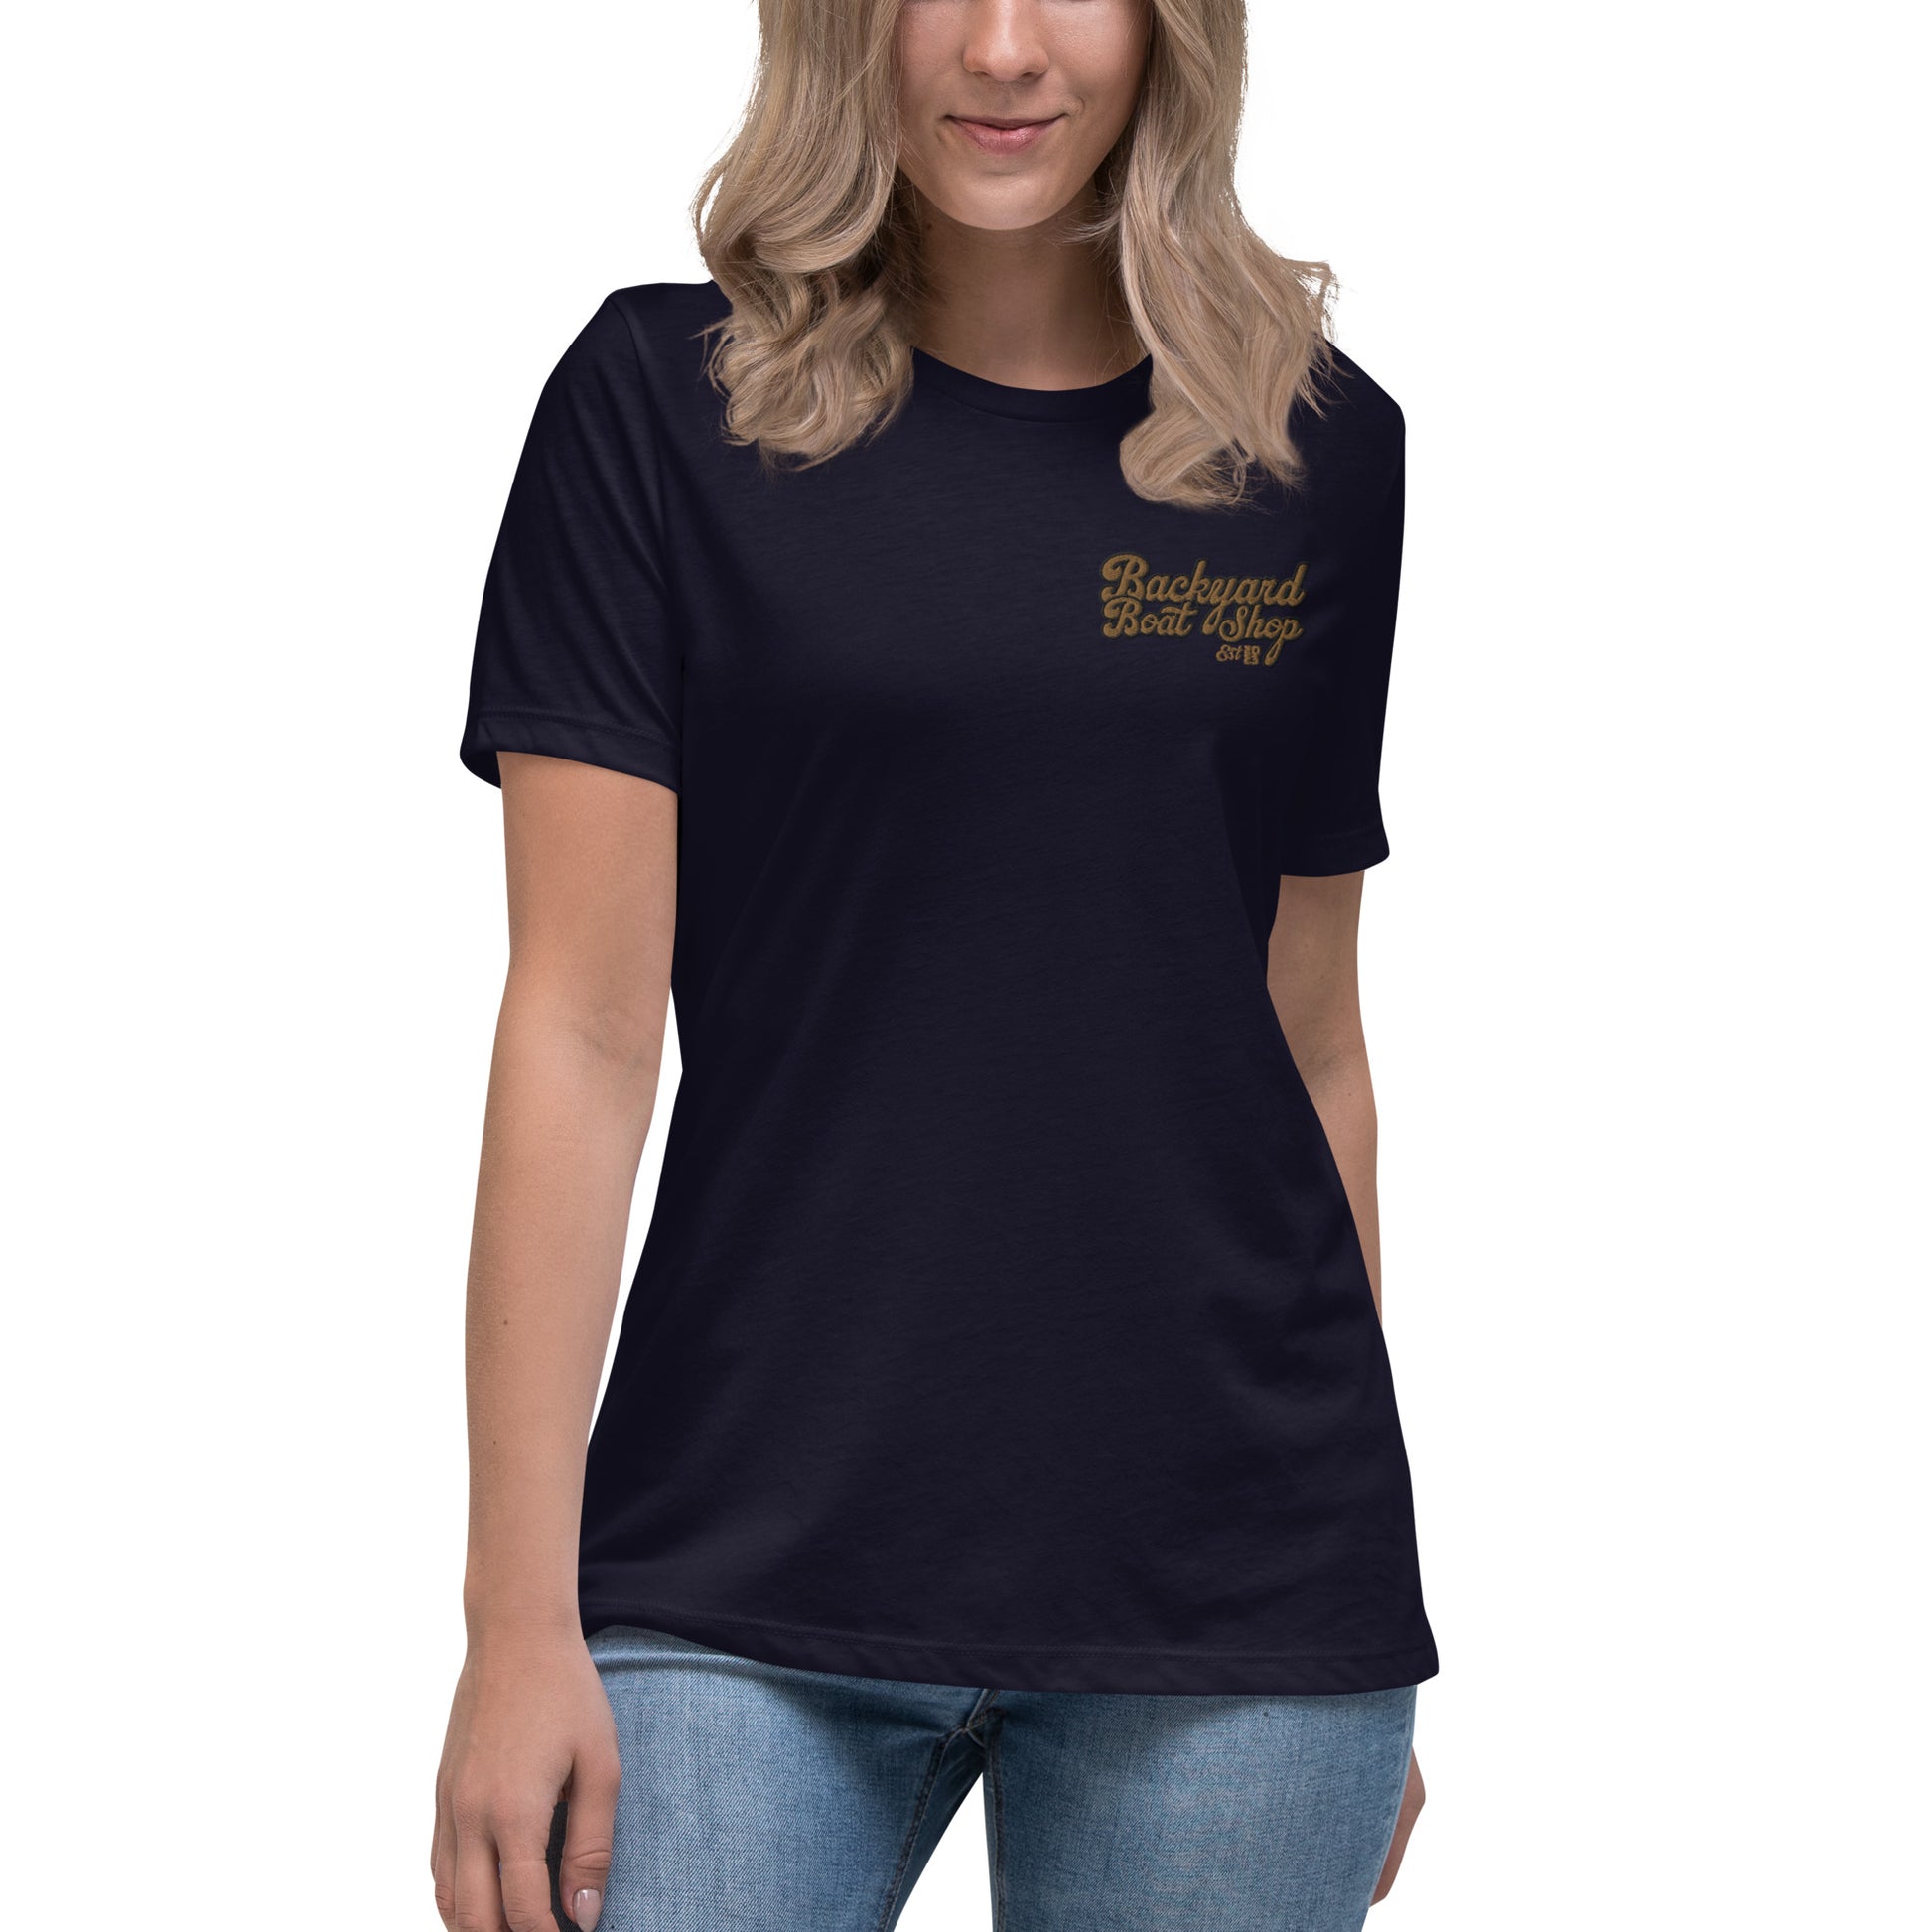 Thread Tank Designs - Let's Go Glamping Women's Relaxed T-Shirt Tee